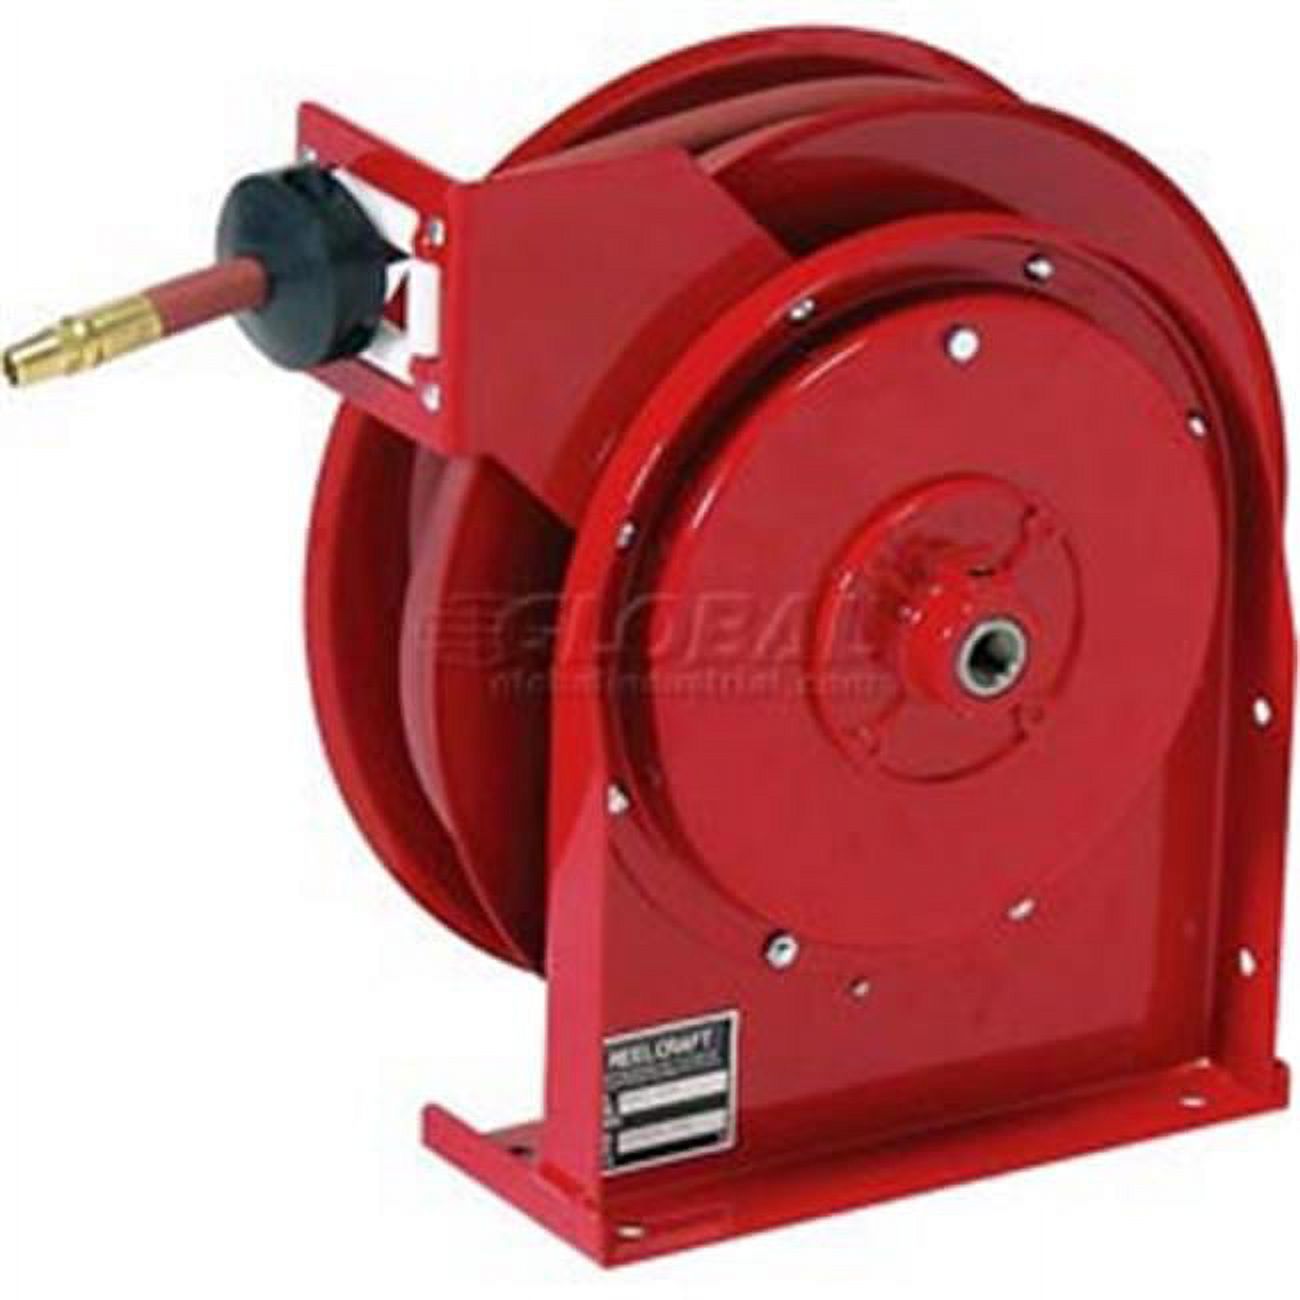 Reelcraft Premium Duty Compact Air/Water 3/8 in. Hose Reel - image 1 of 2